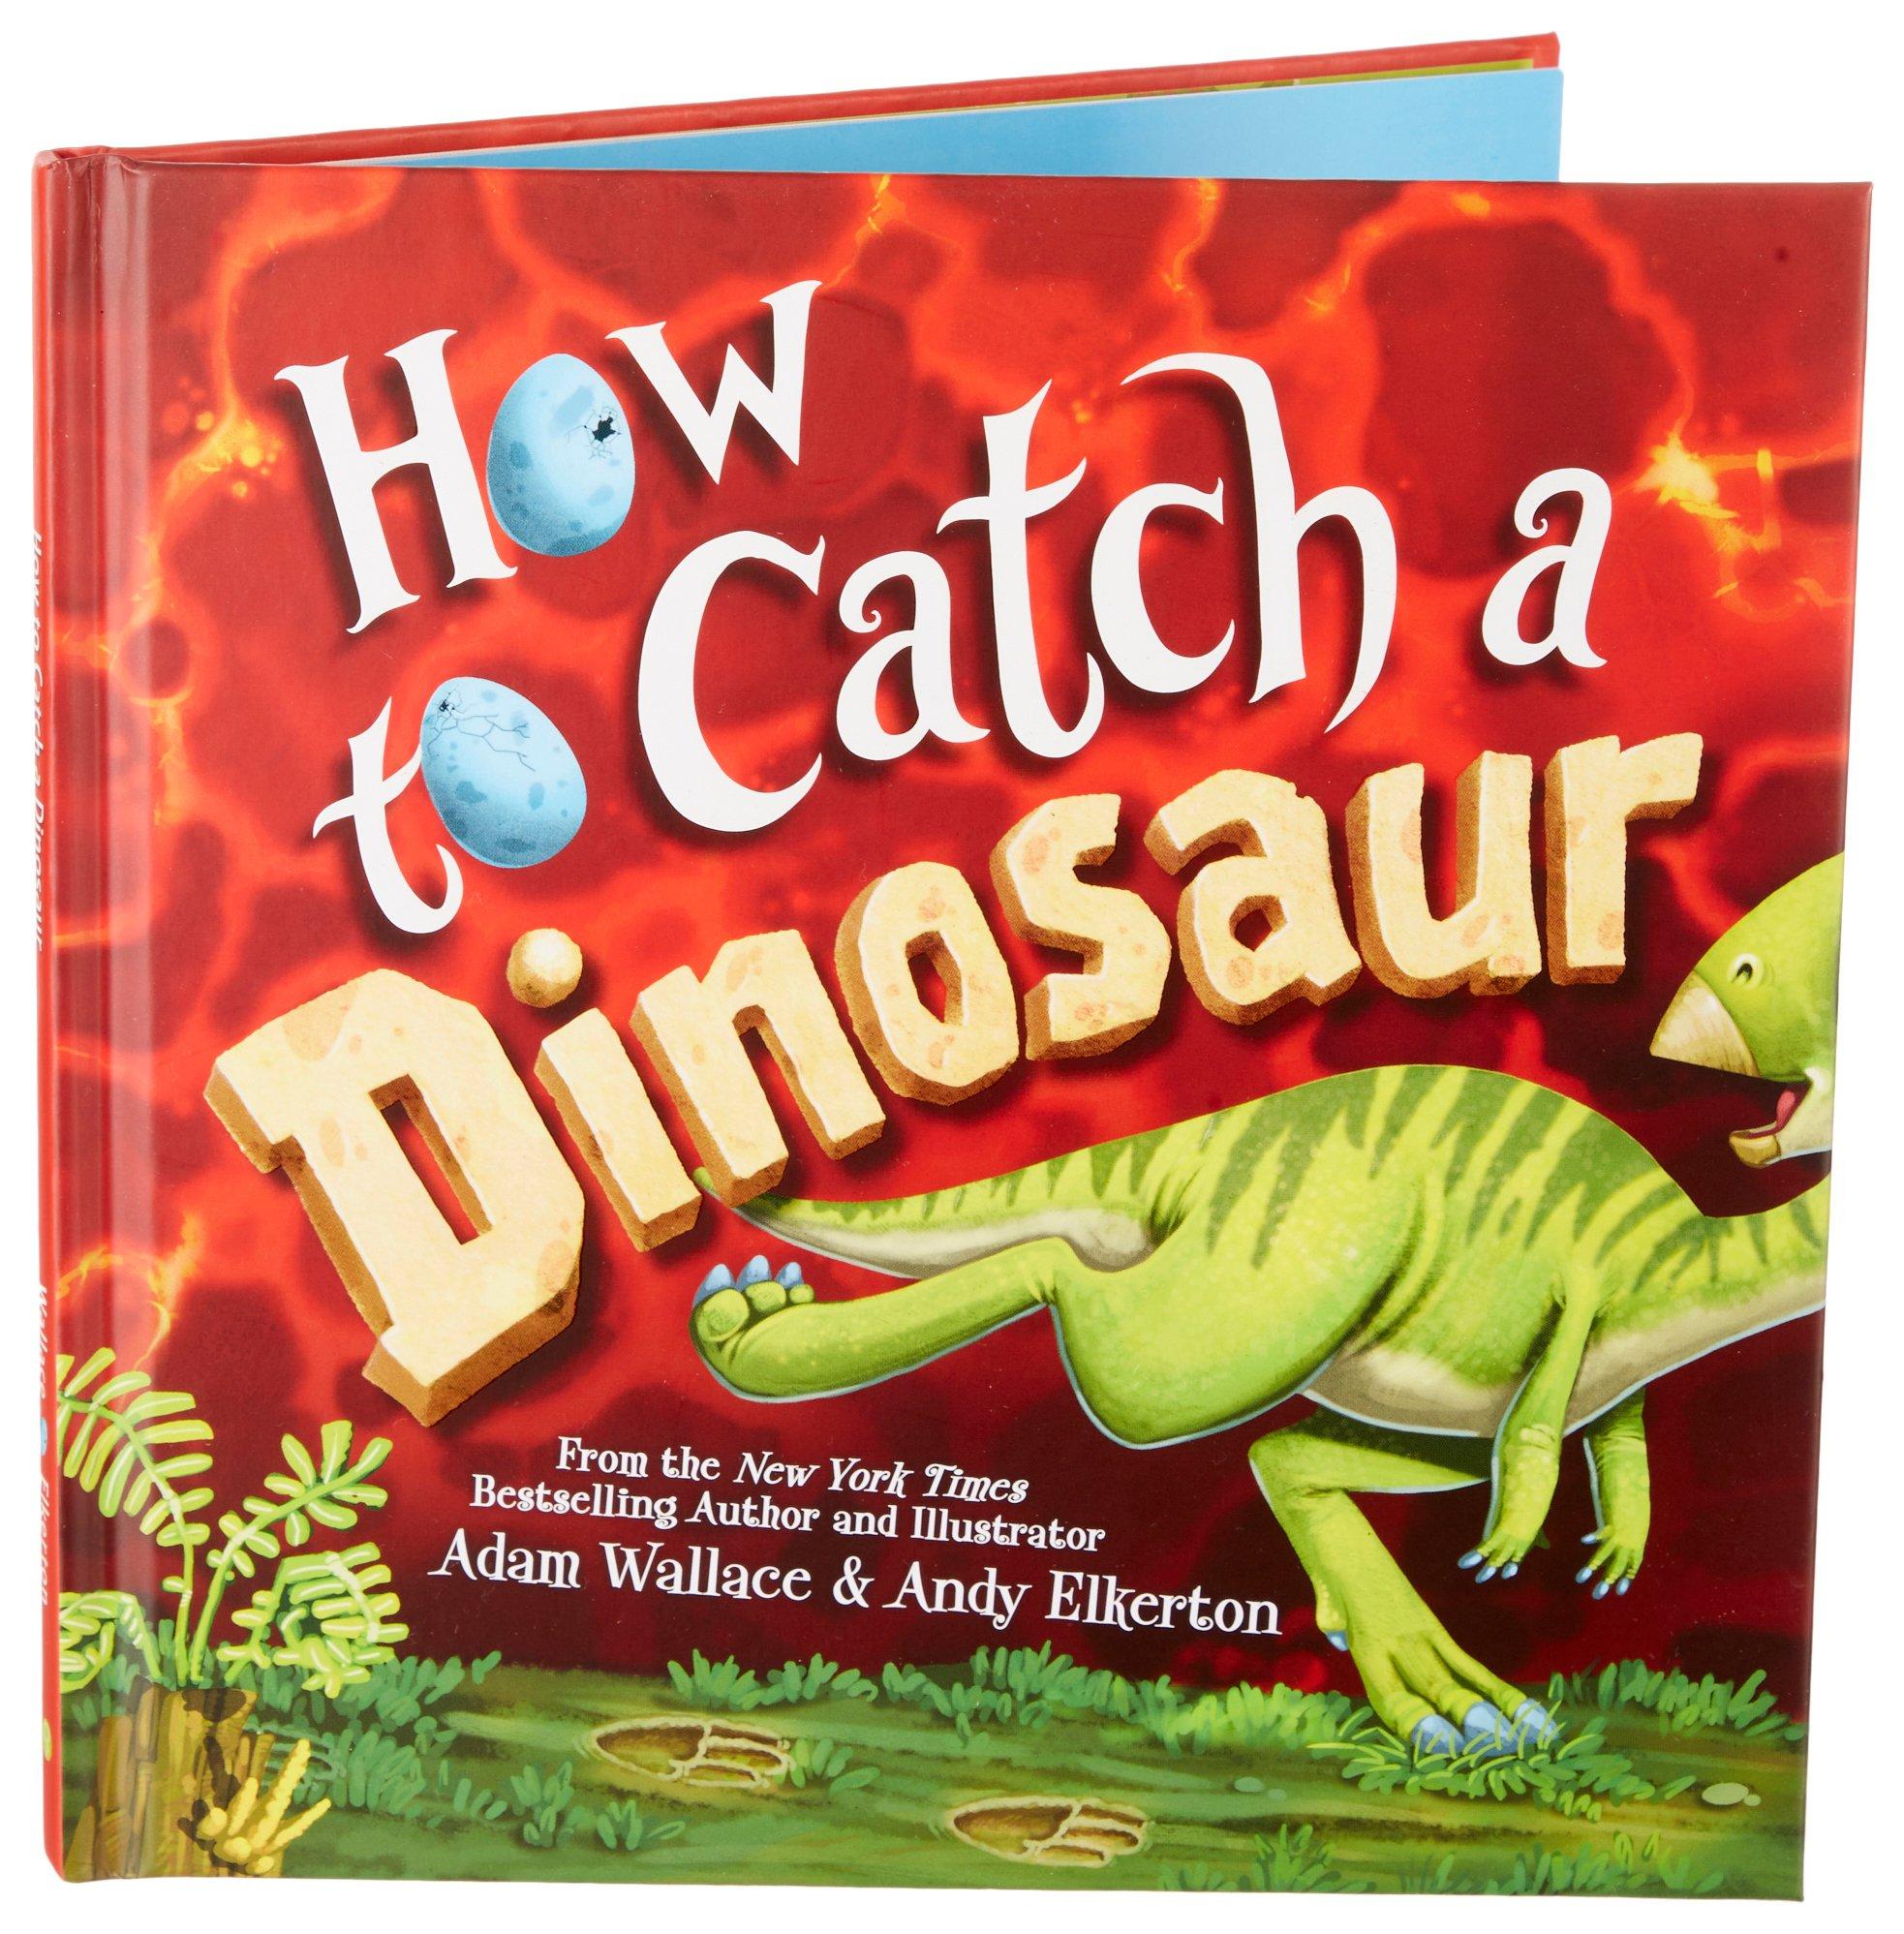 Sourcebooks How To Catch A Dinosaur Book